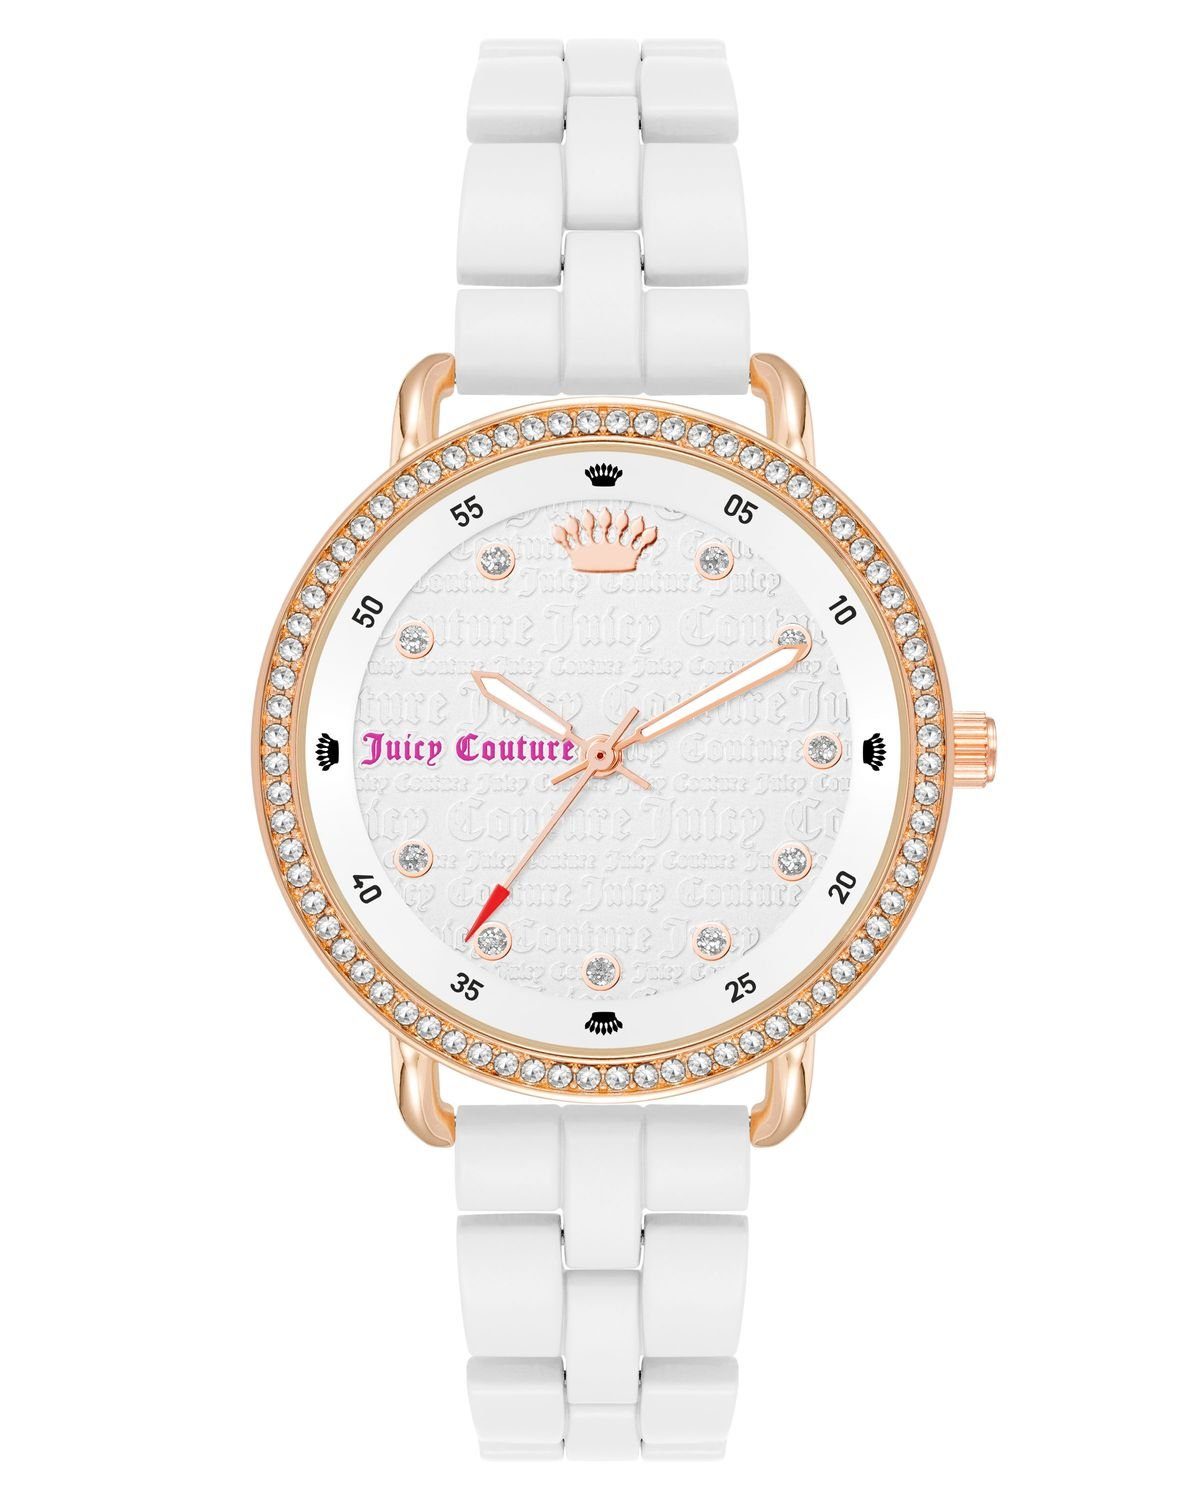 Couture JC/1310RGWT Digitaluhr Juicy